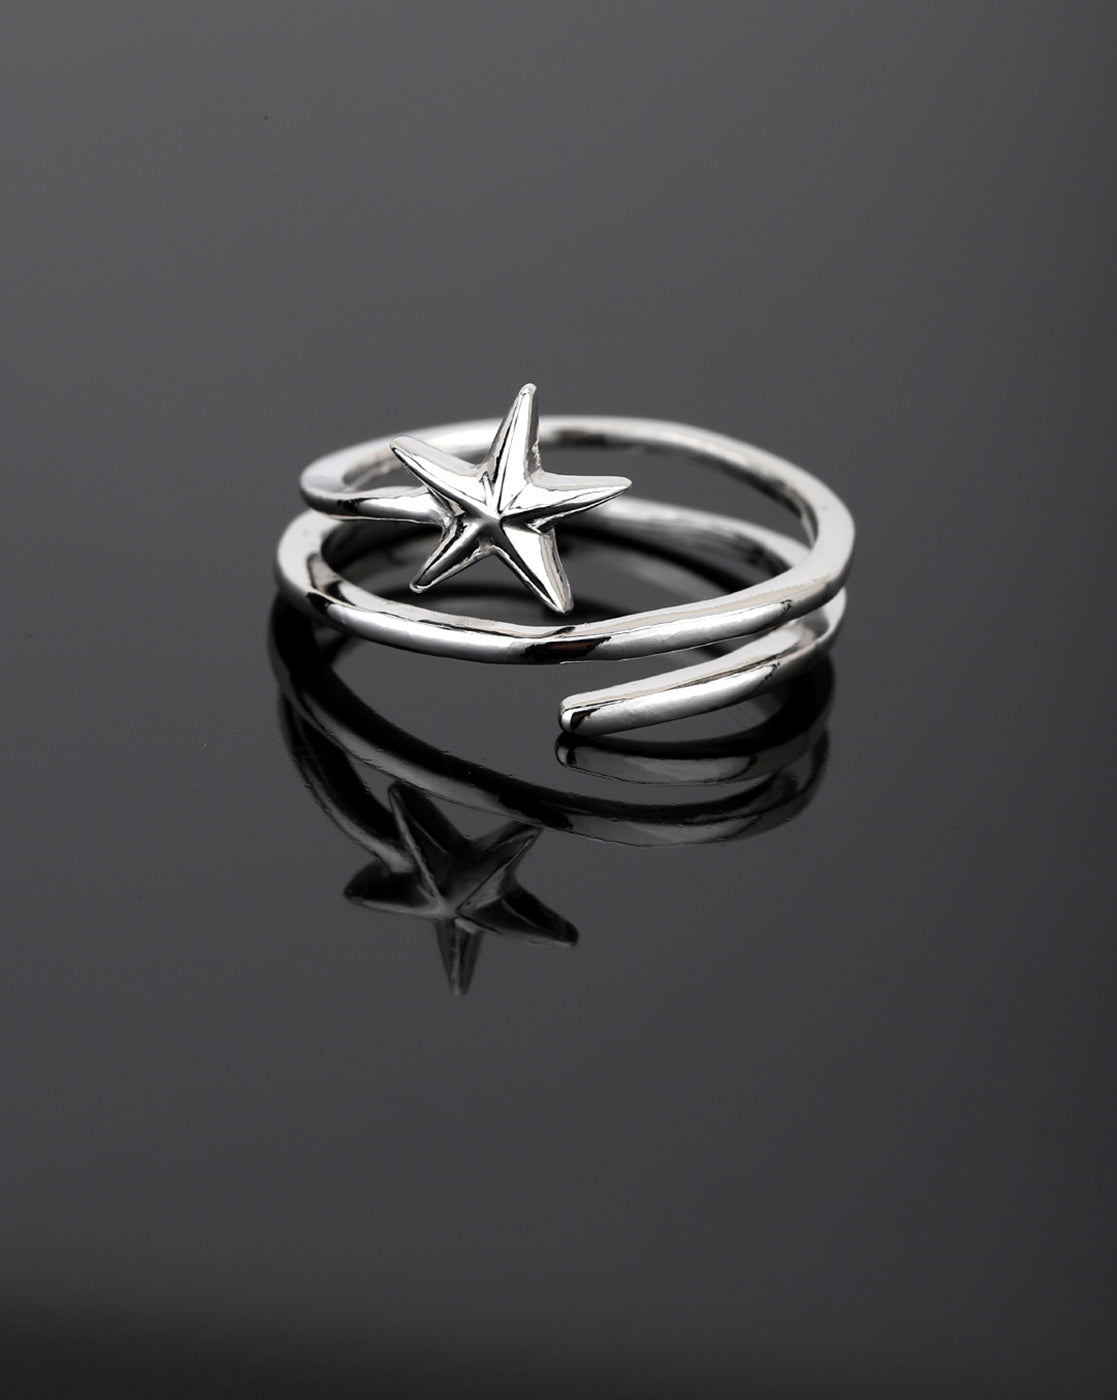 Carlton London Rhodium Plated Silver Toned Adjustable Contemporary Star Finger Ring For Women